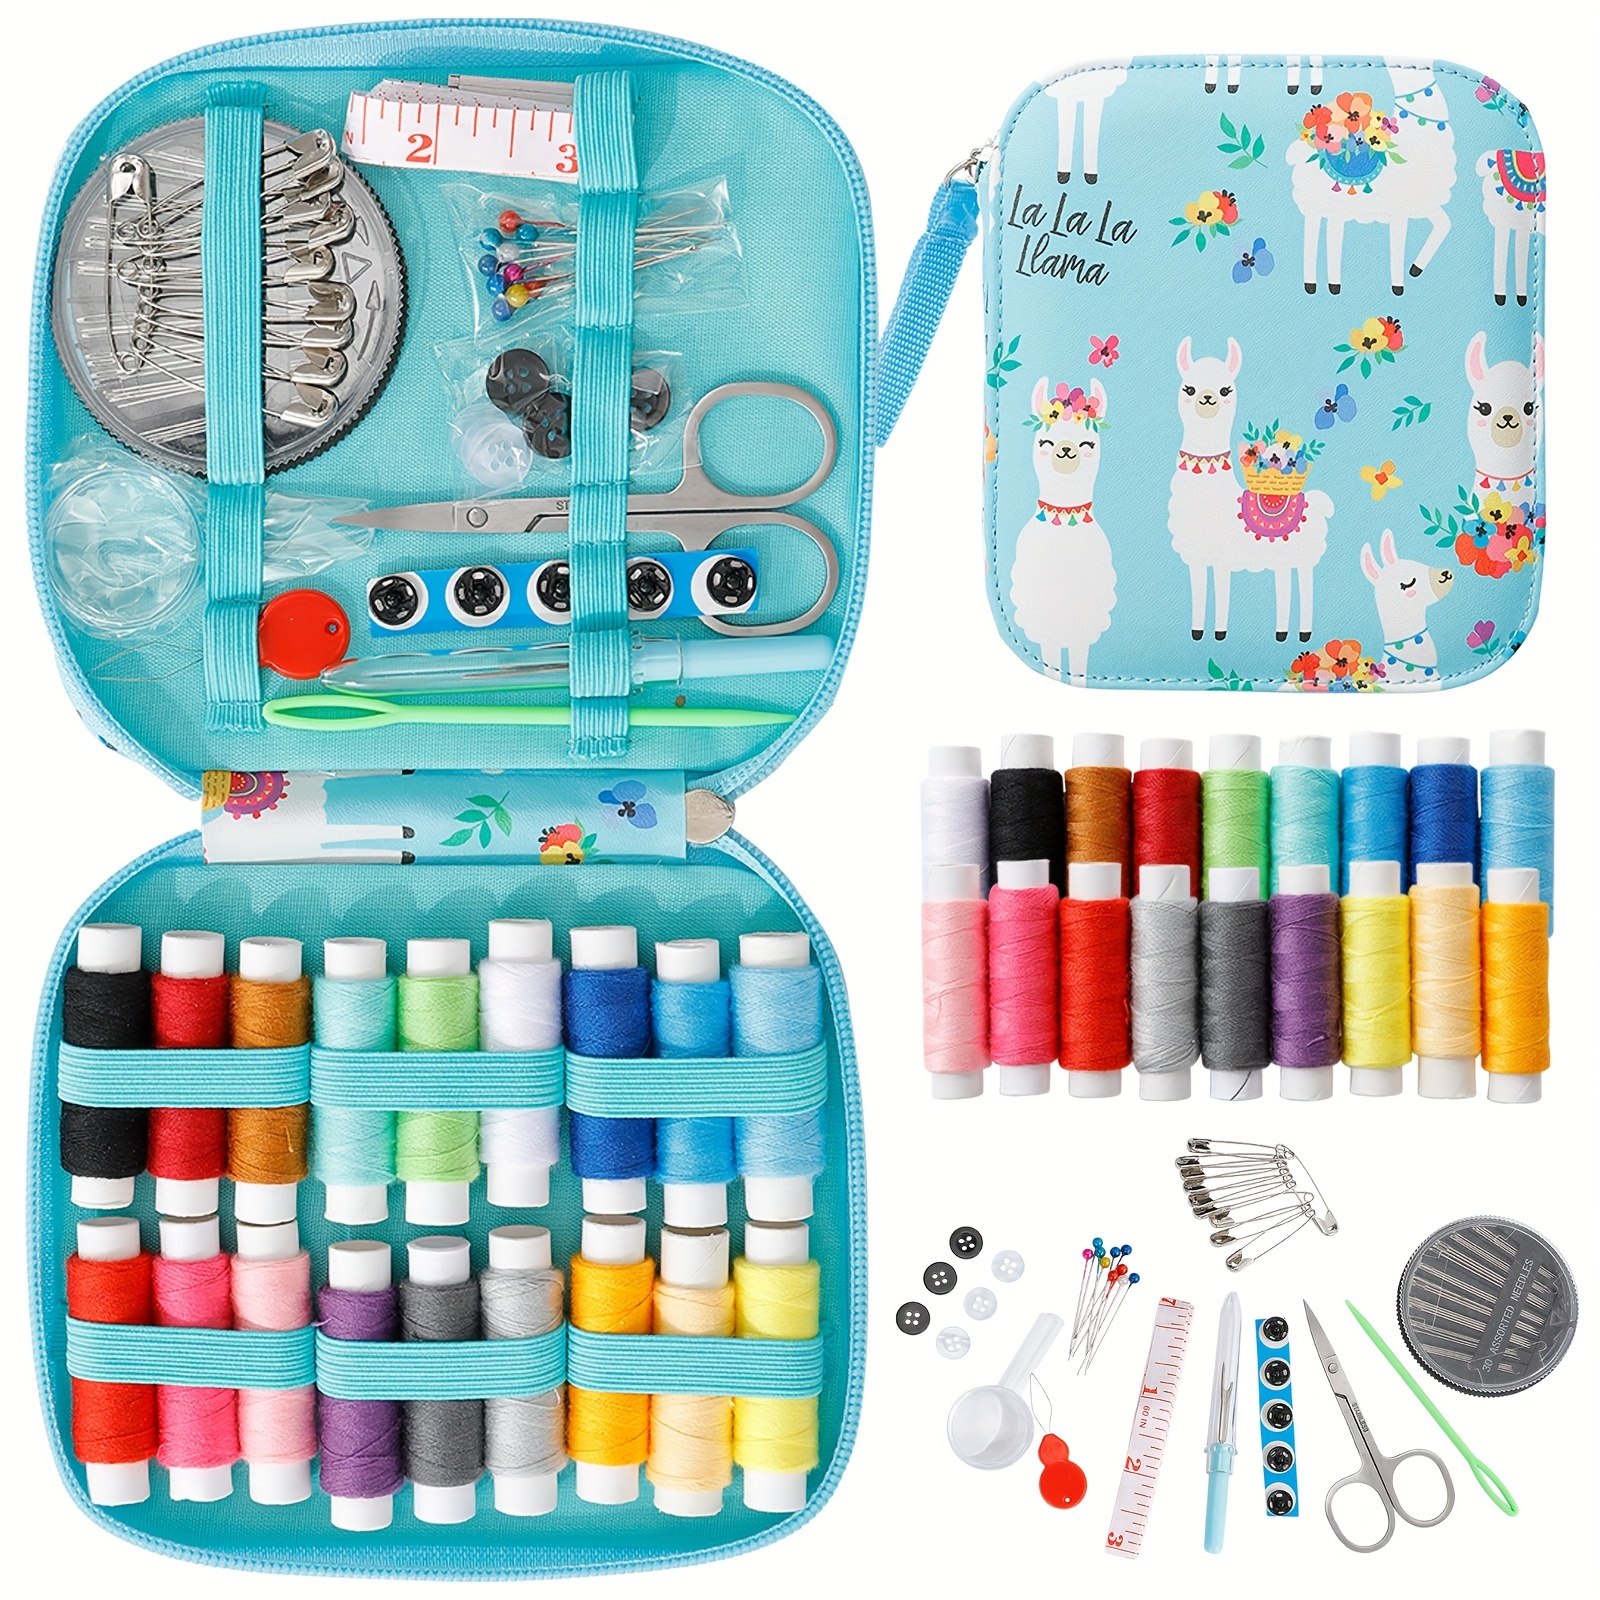 Sewing Kit Basic,Marcoon Needle and Thread Kit with Sewing Supplies and Accessories for Adults,Kids,Beginner,Home,Travel,Emergency Including